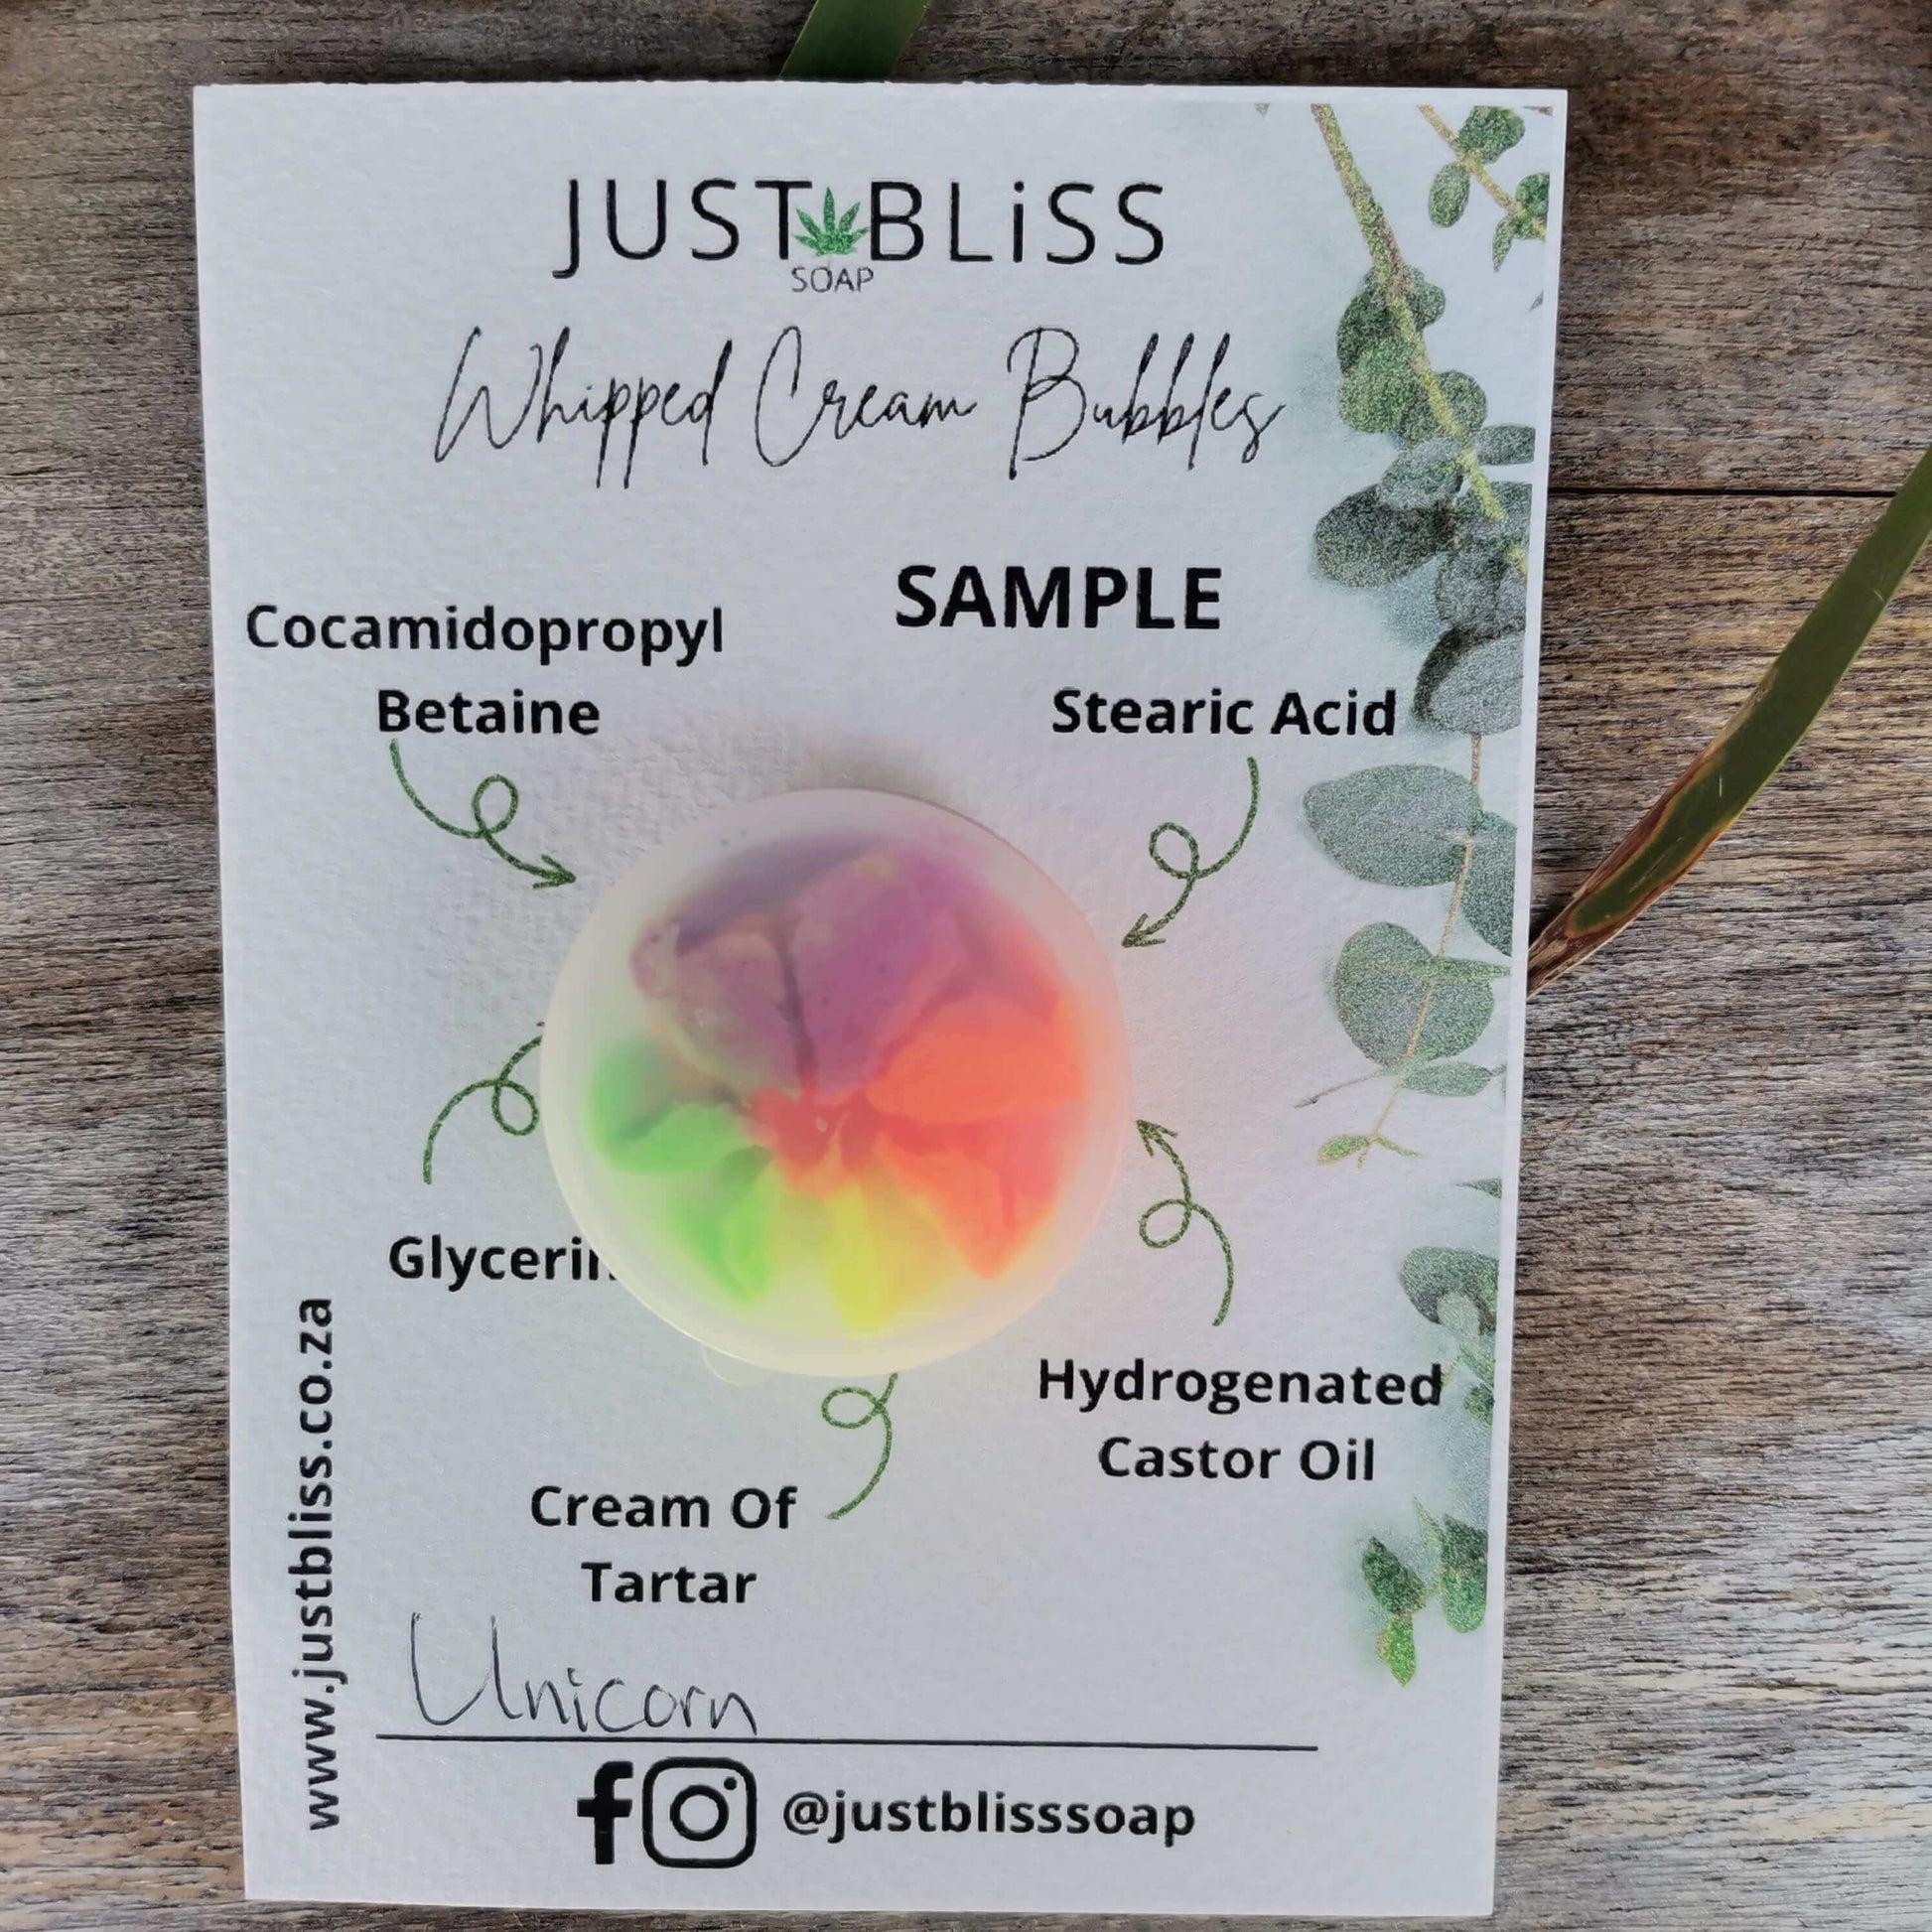 JUSTBLISS: WHIPPED CREAM BUBBLES: Sample Unicorn-10ml